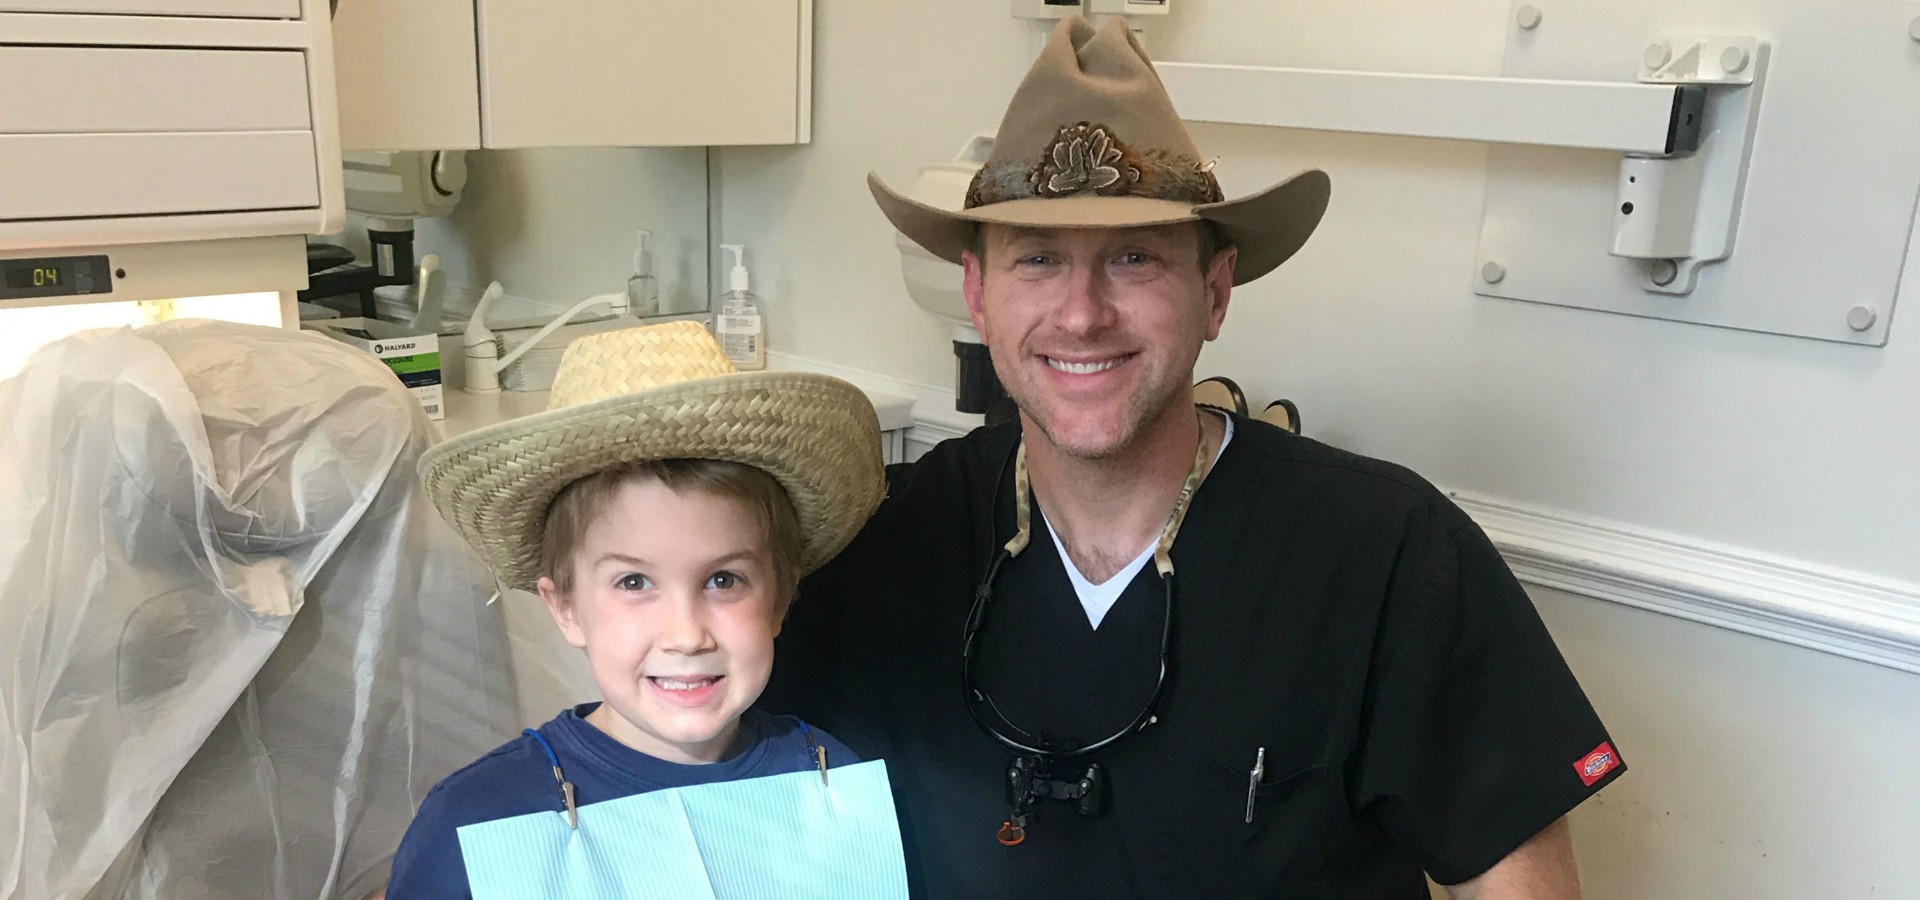 Dr. Bill Argersinger smiling with male pediatric patient while both wearing cowboy hats.